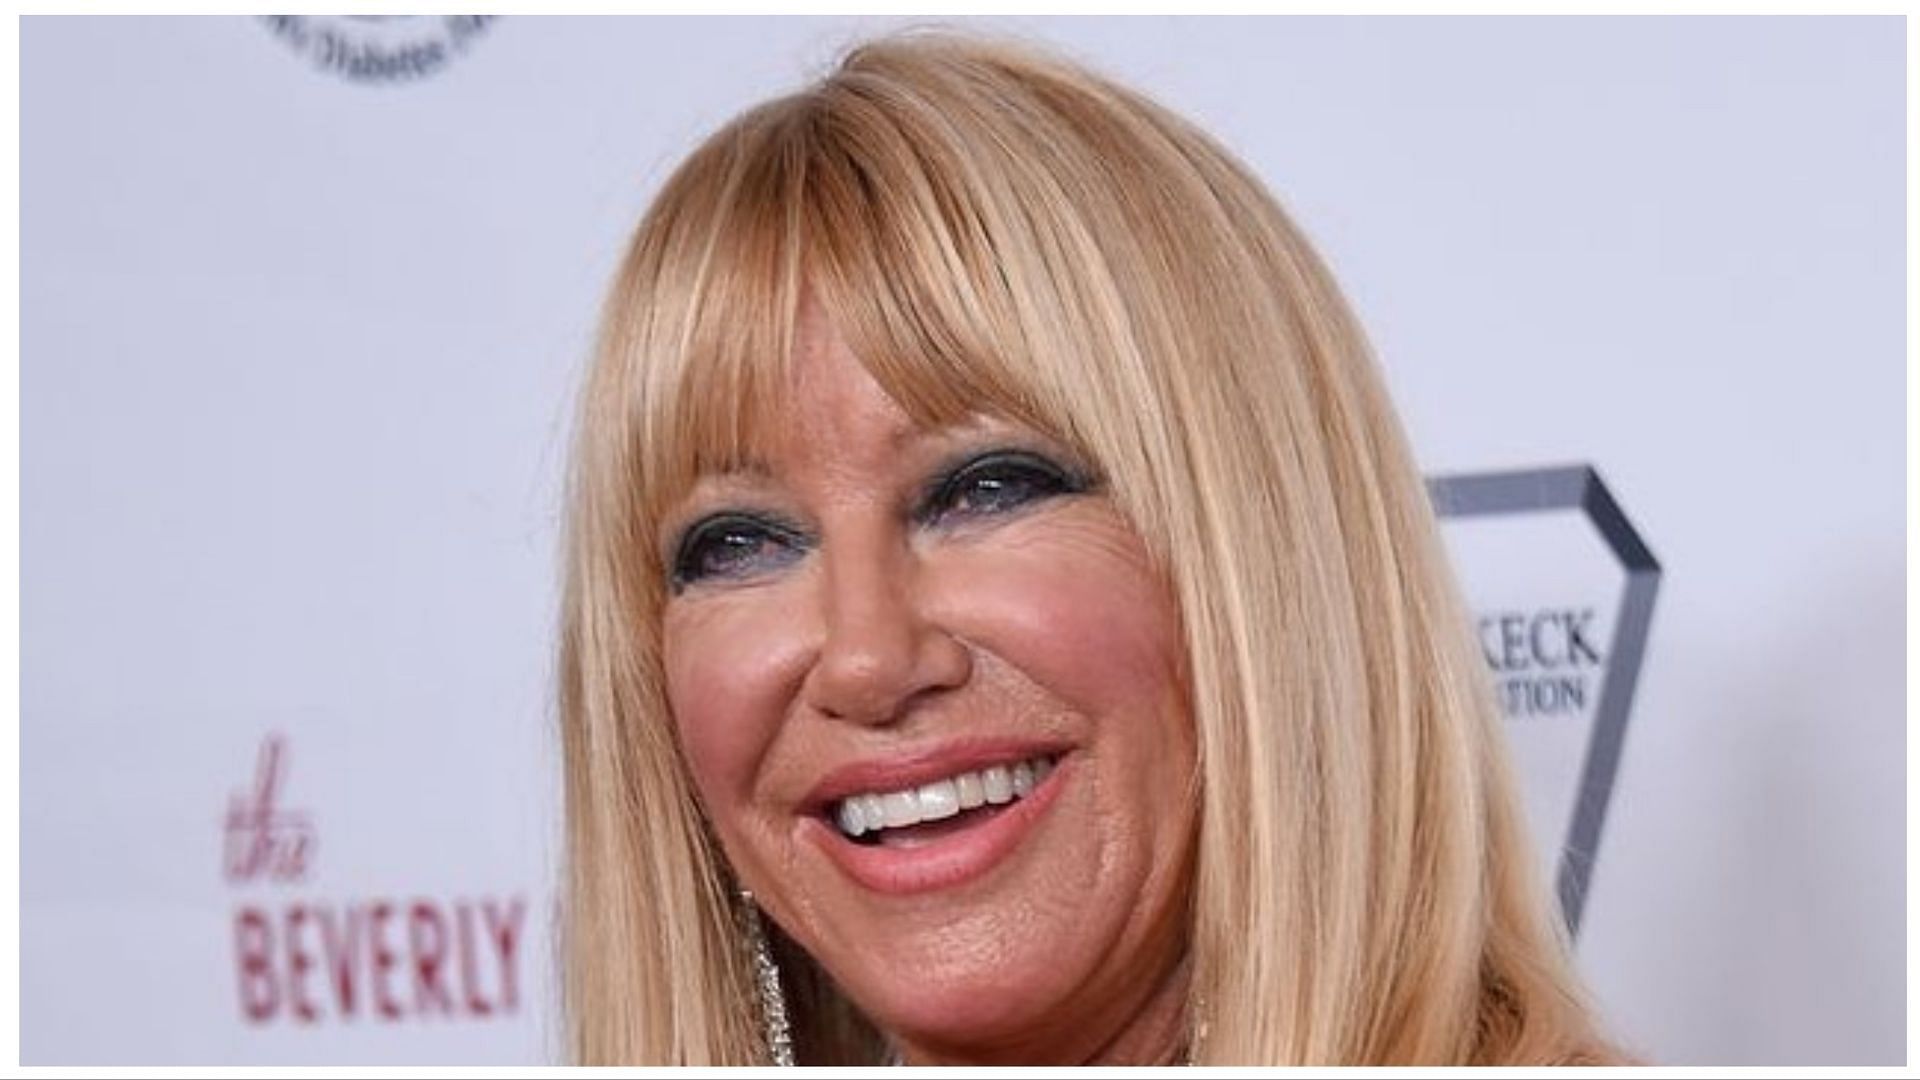 Breast cancer with metastasis to the brain explored as Suzanne Somers passes away, aged 76 (Image via Instagram/@suzannesomers)